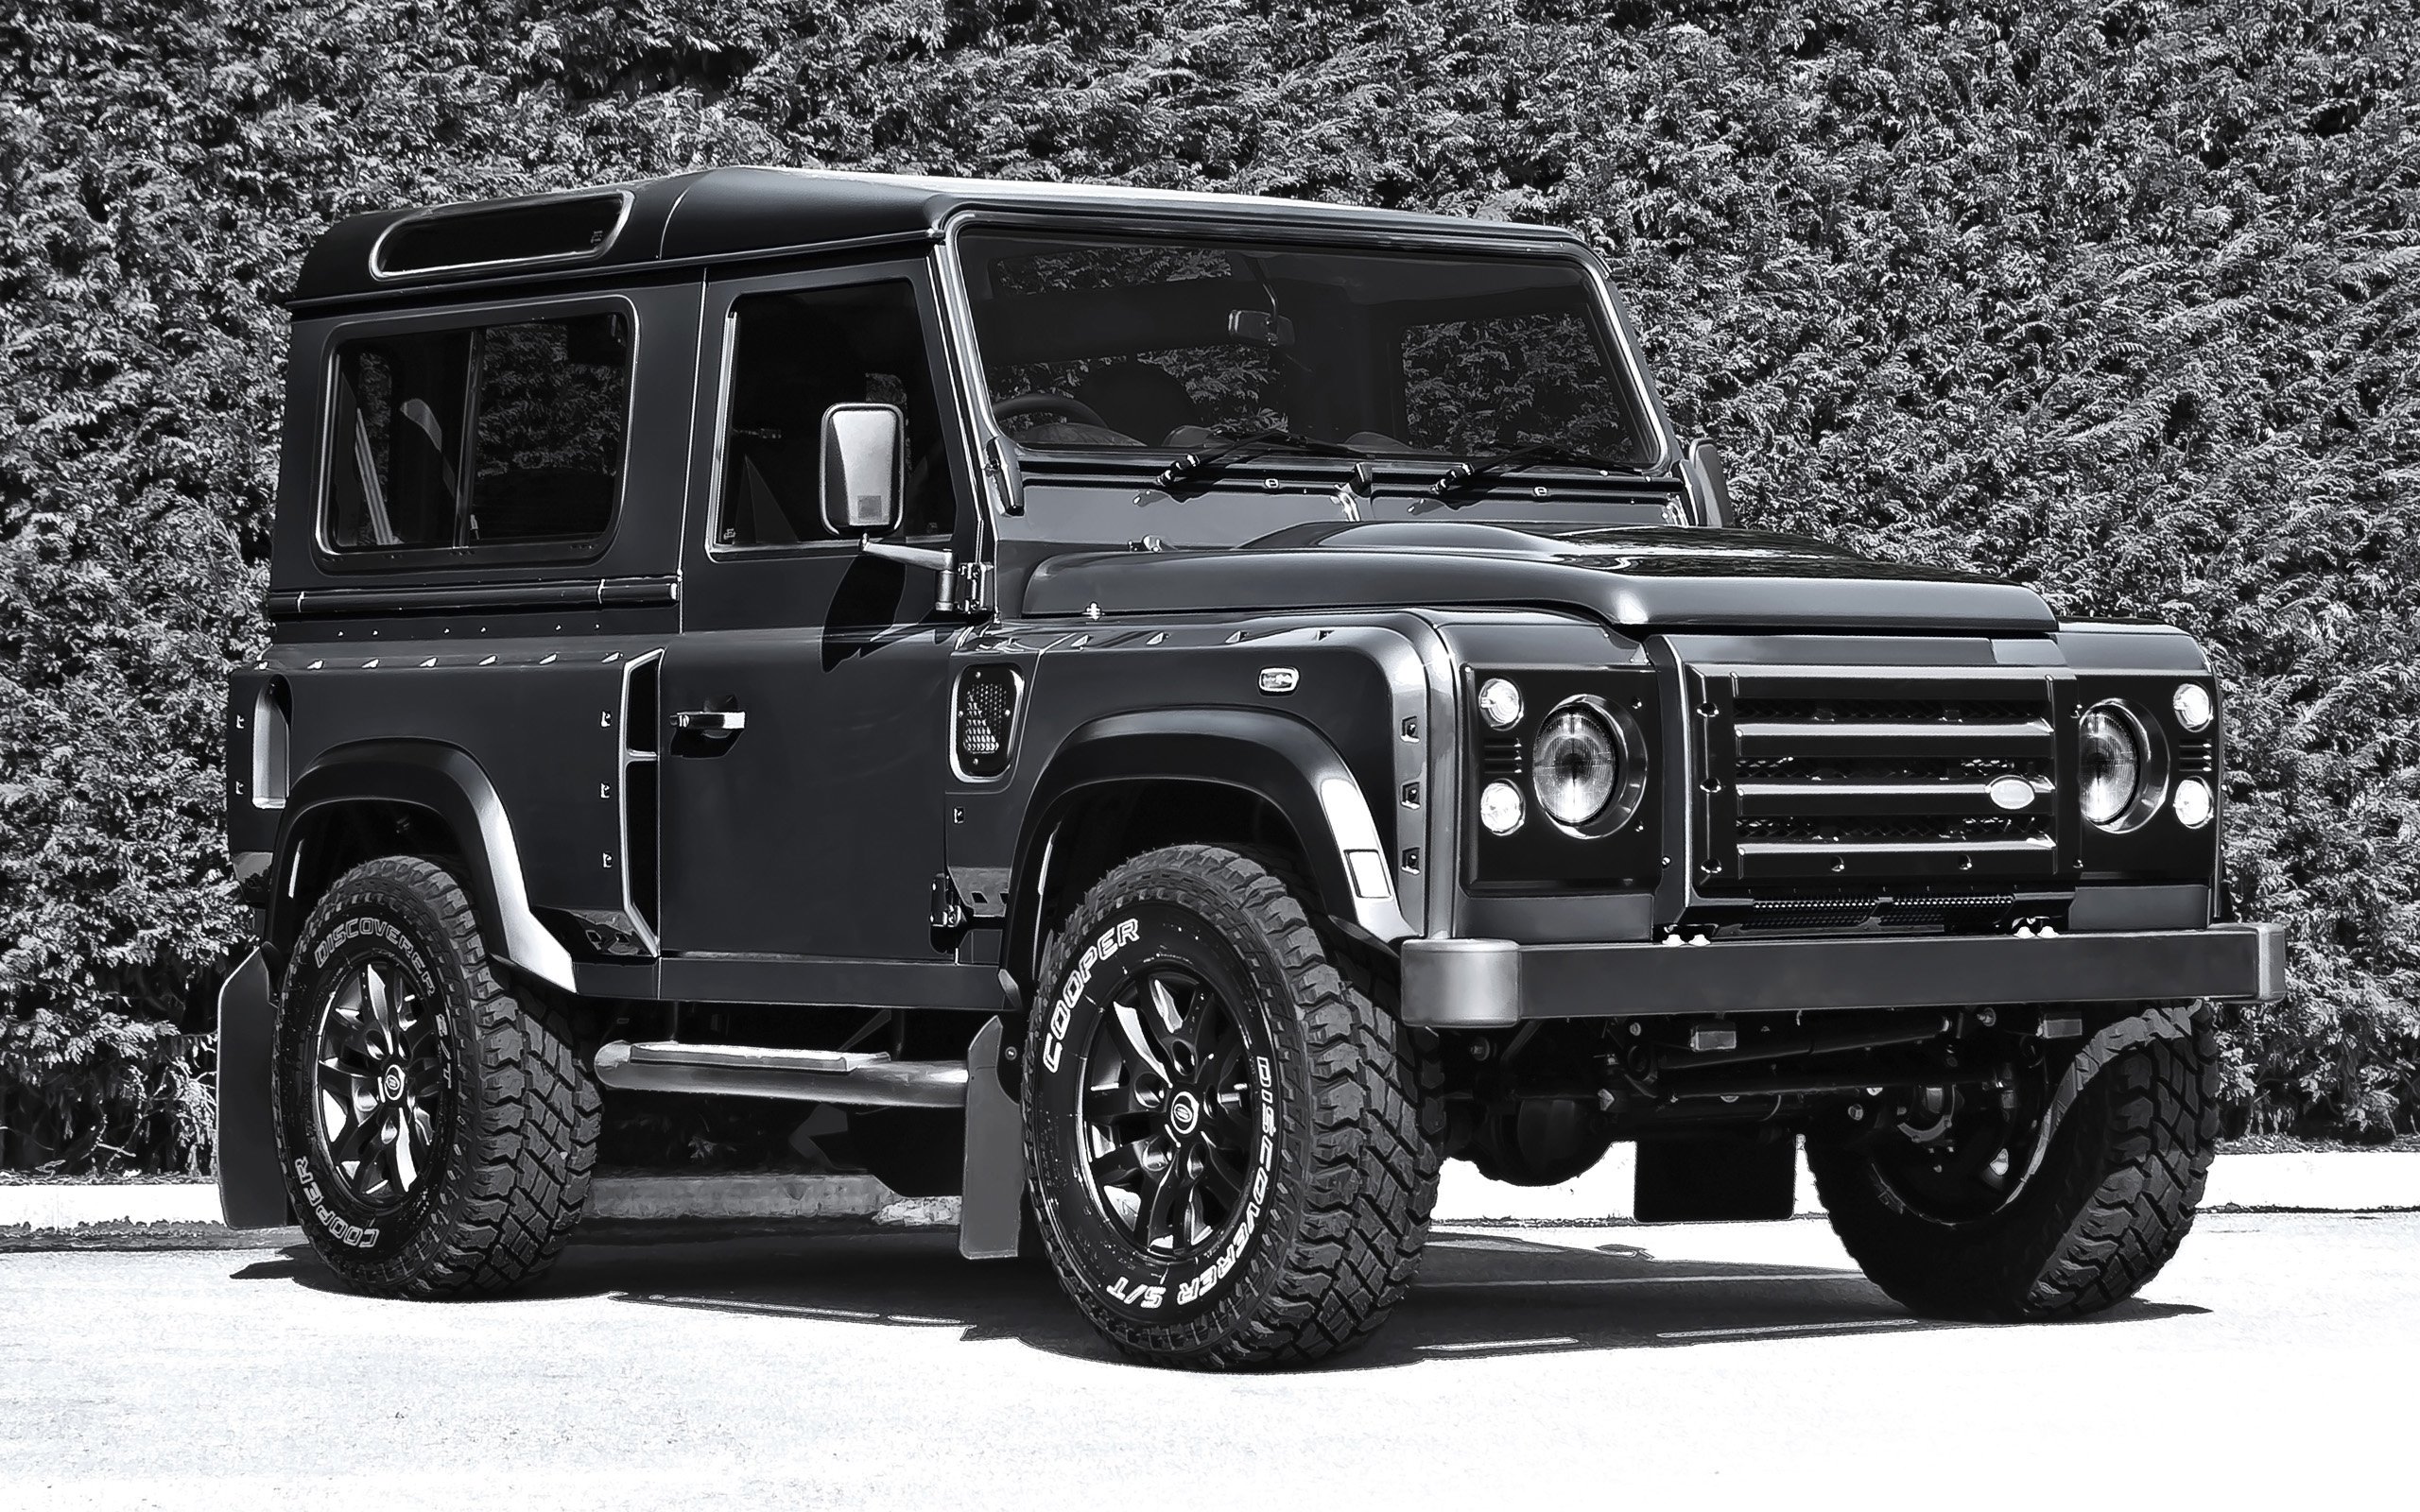 2013, A kahn design, Land, Rover, Chelsea, Wide, Track, Military, Grey, Defender, Tuning, 4x4 Wallpaper